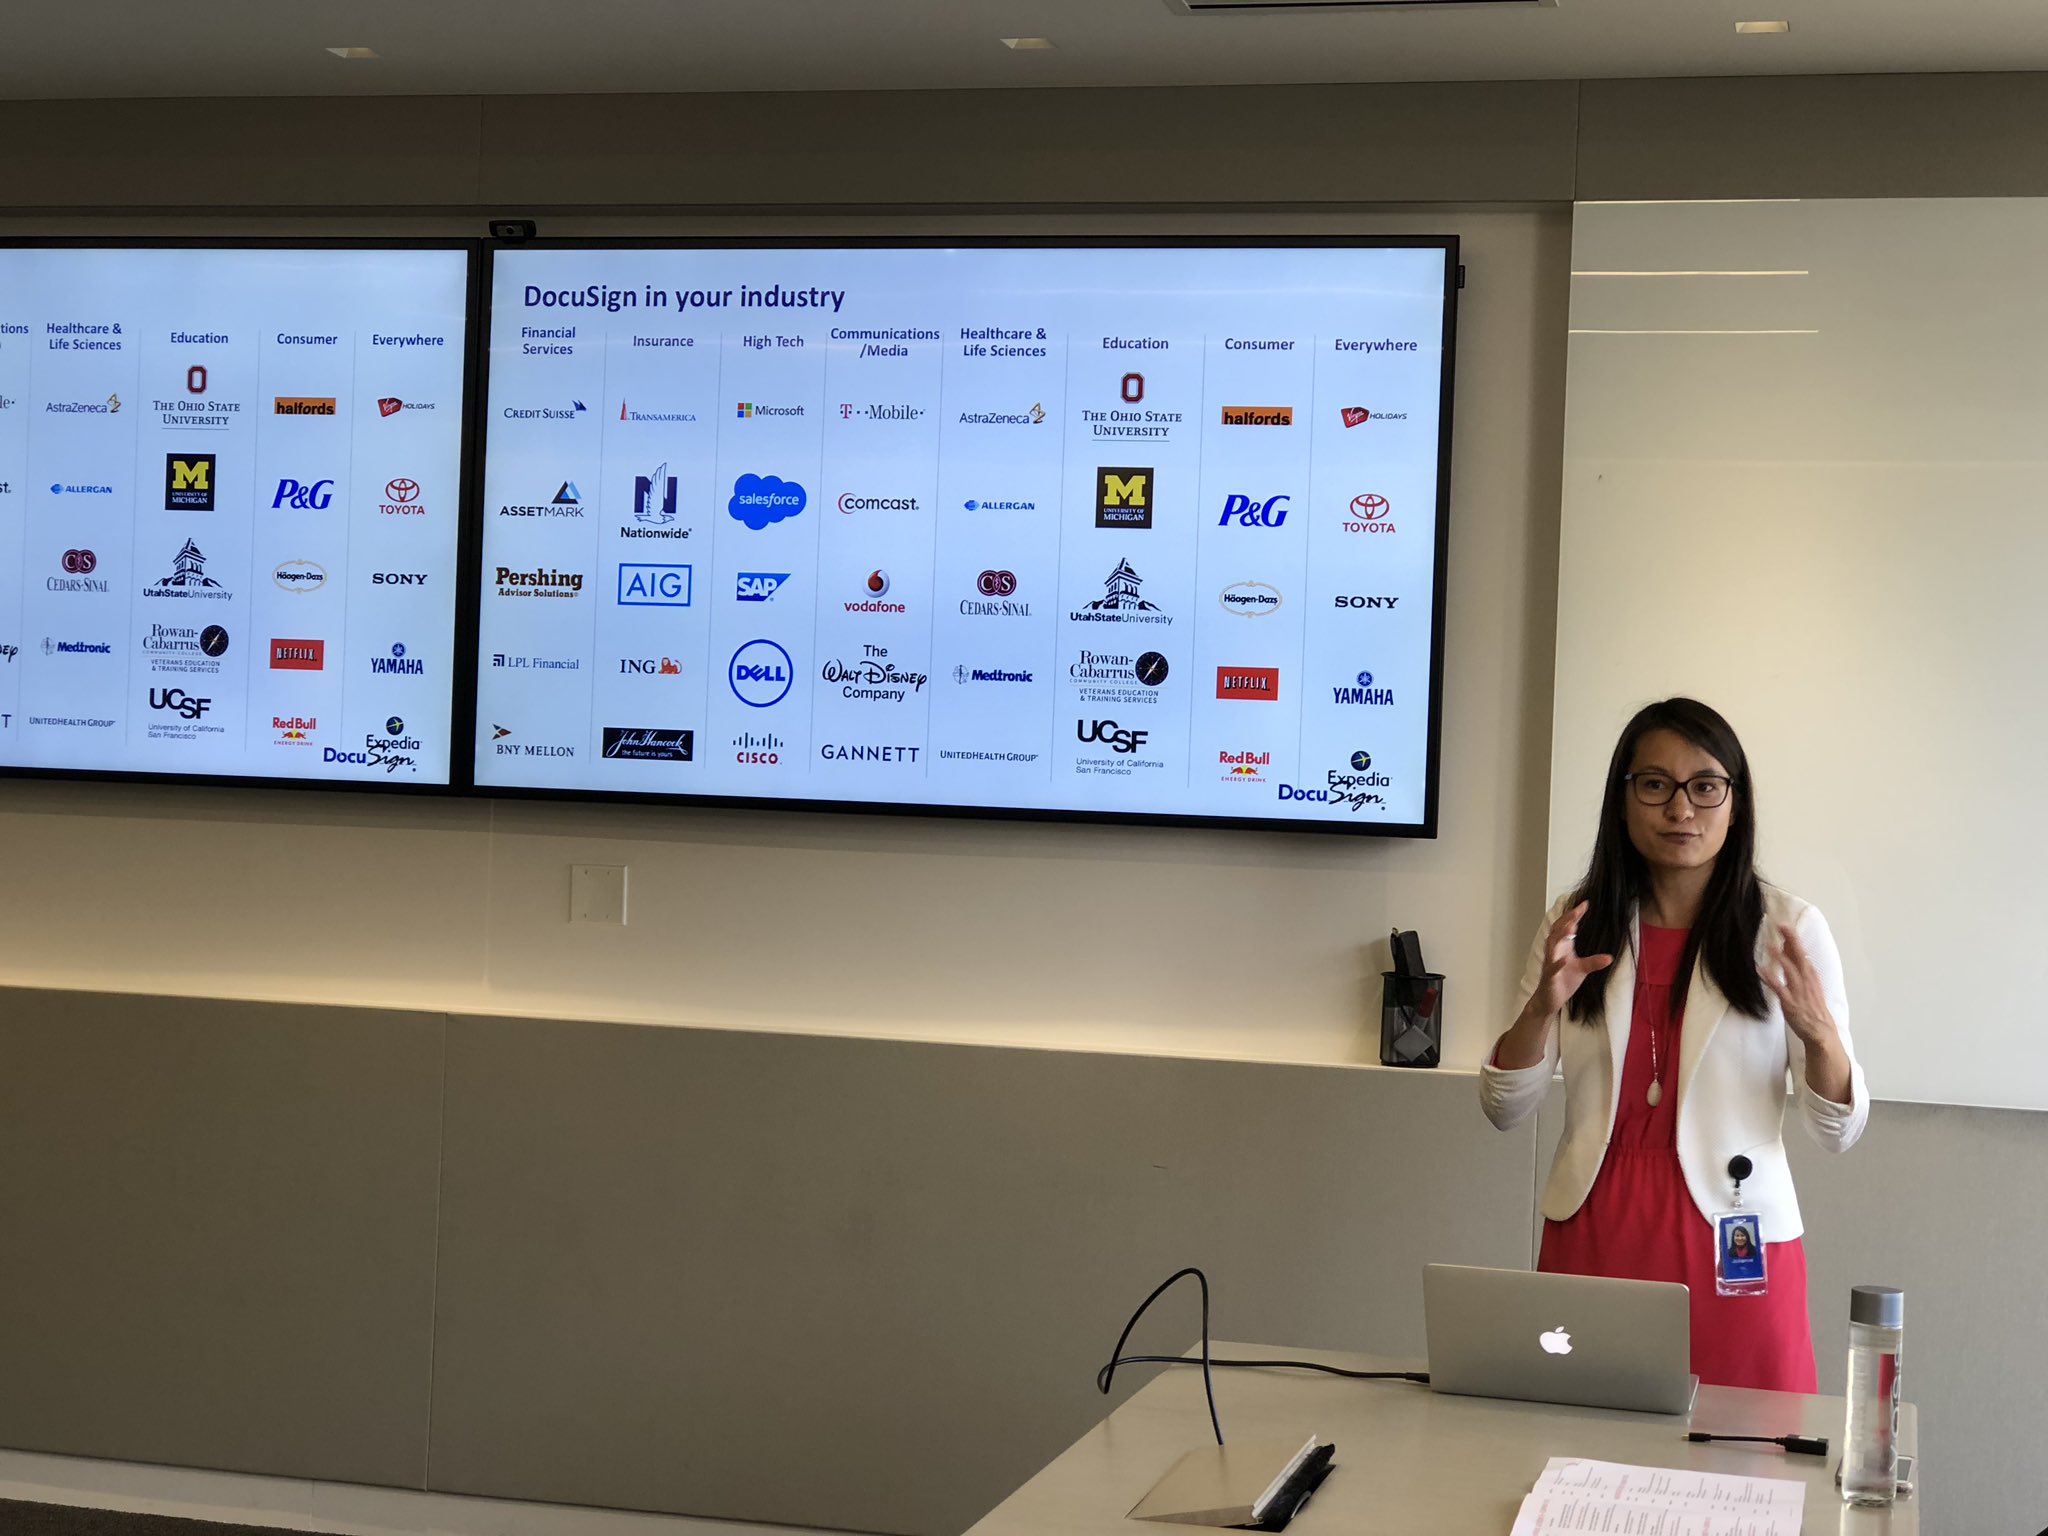 DocuSign staff represent the coverage of industry with the product